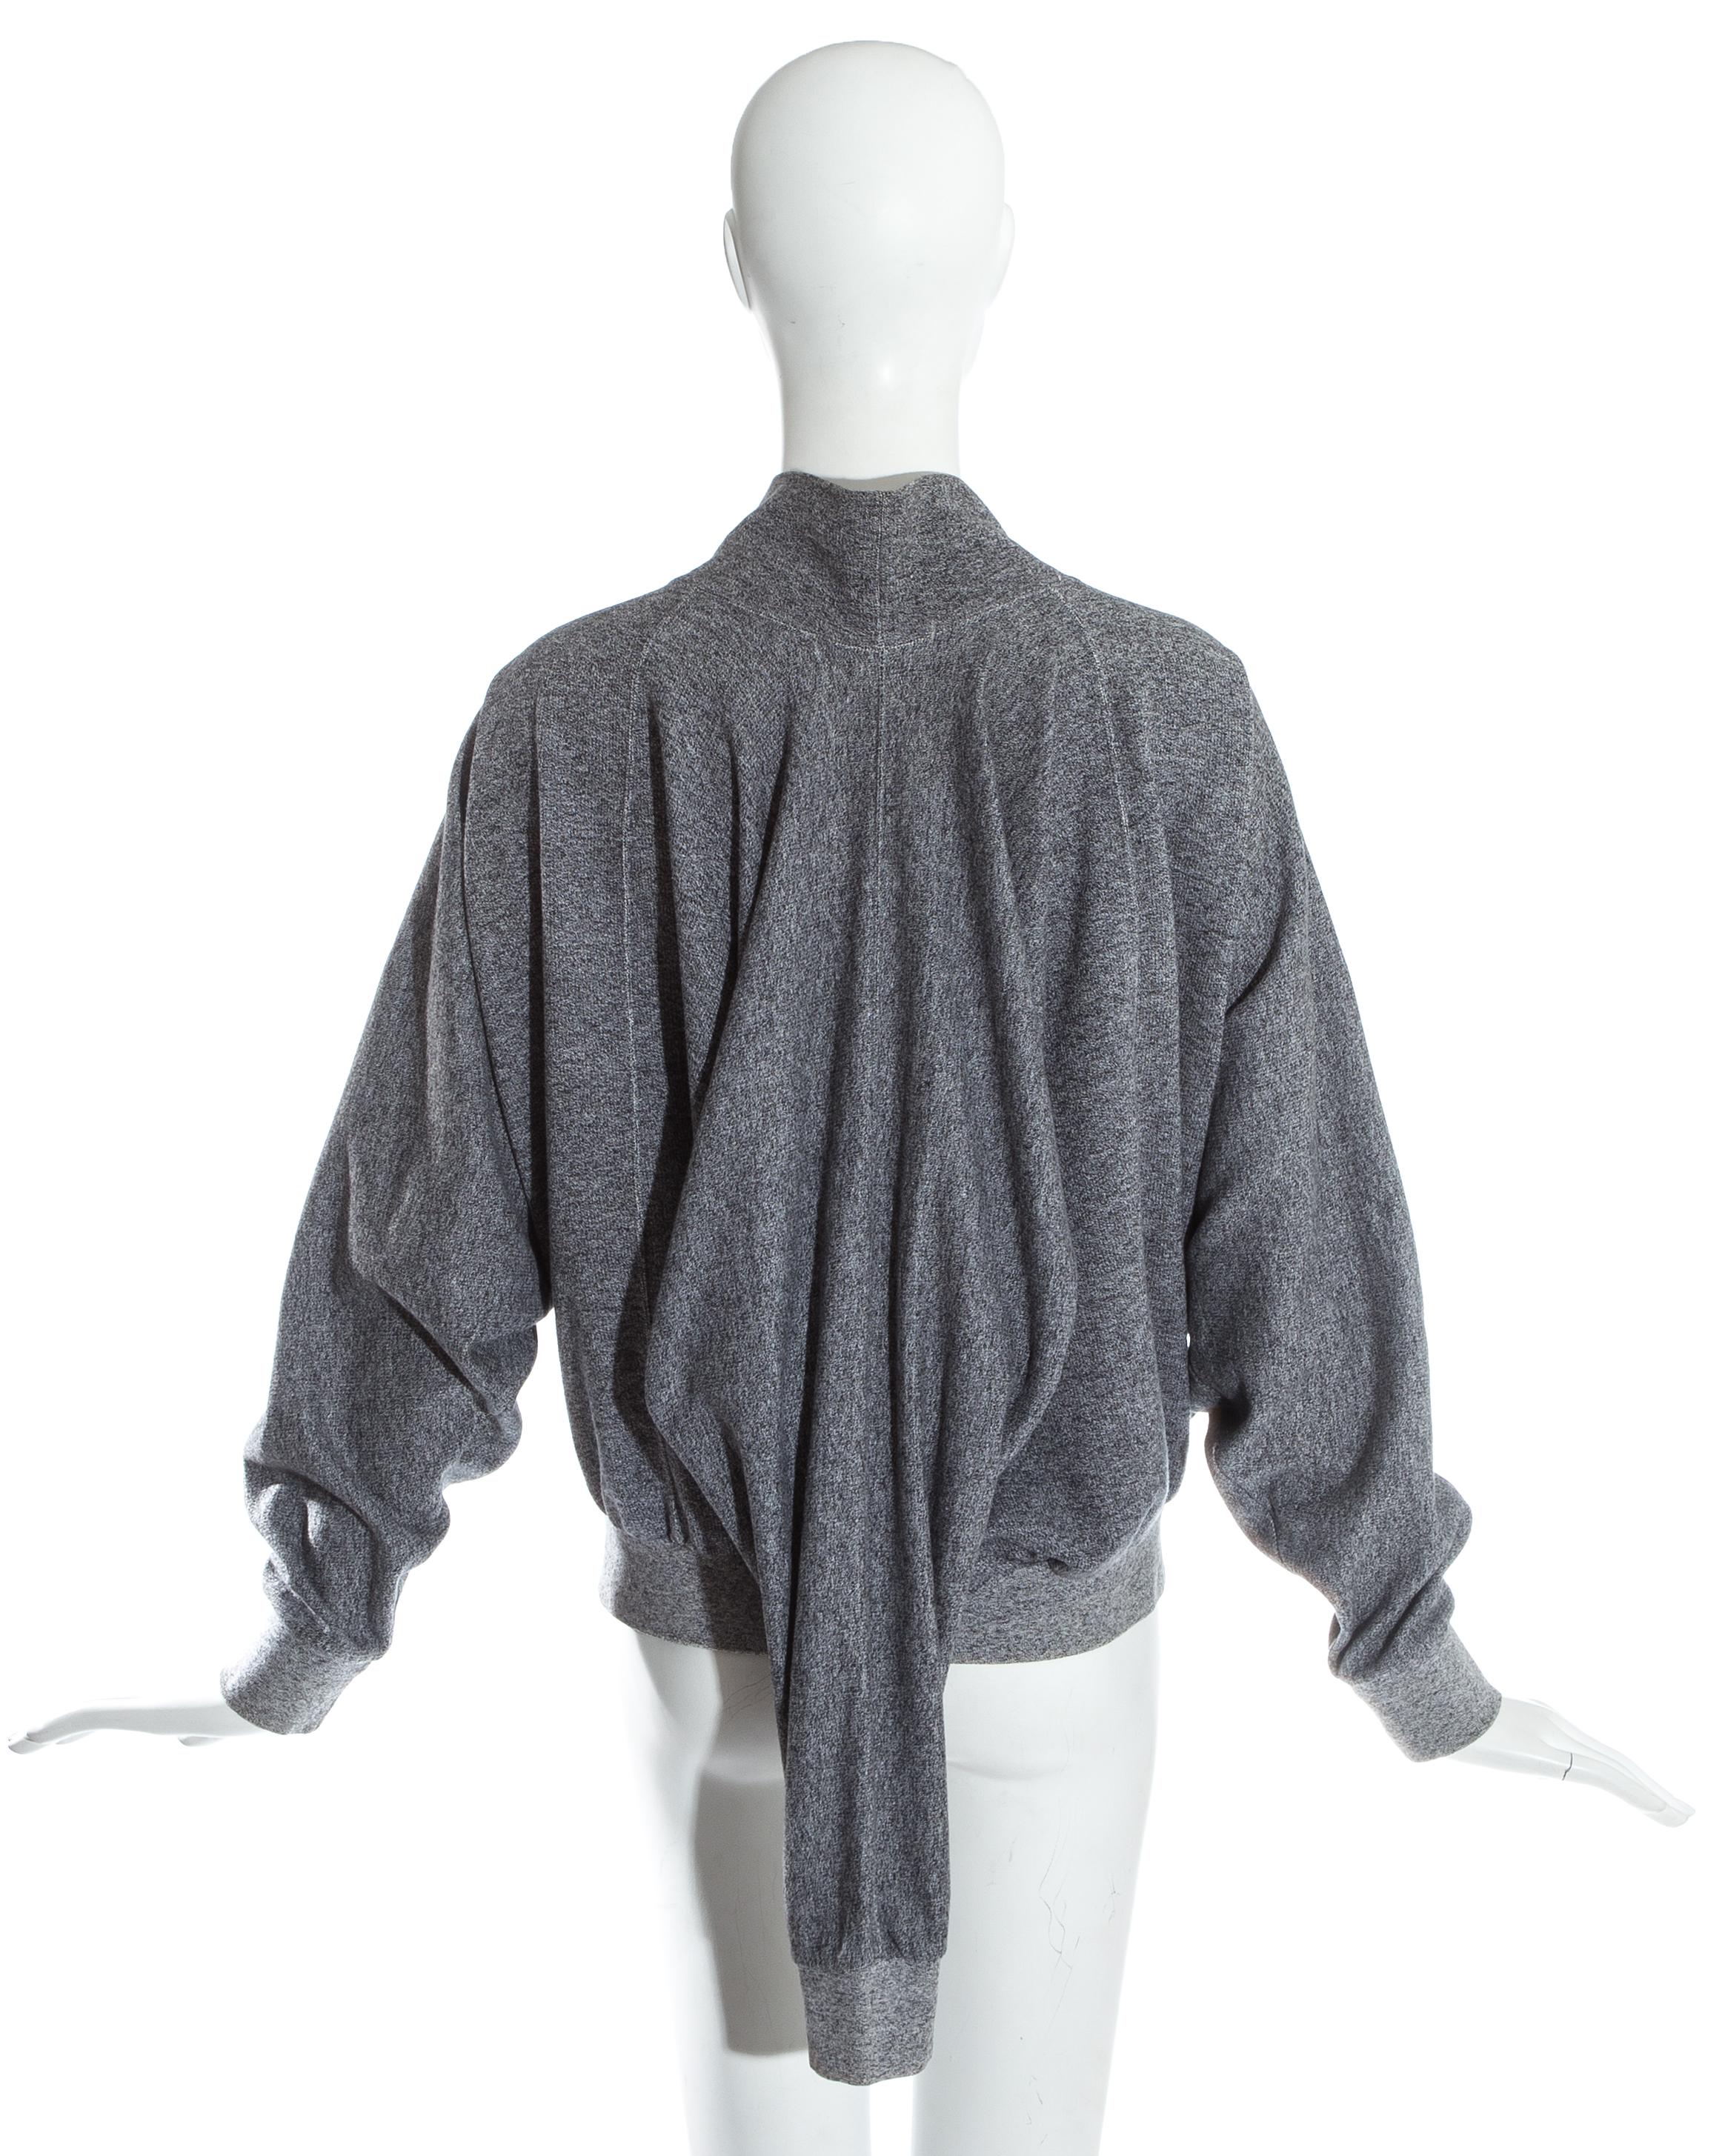 Issey Miyake grey three-armed knitted wool sweater, fw 1985 In Good Condition For Sale In London, London